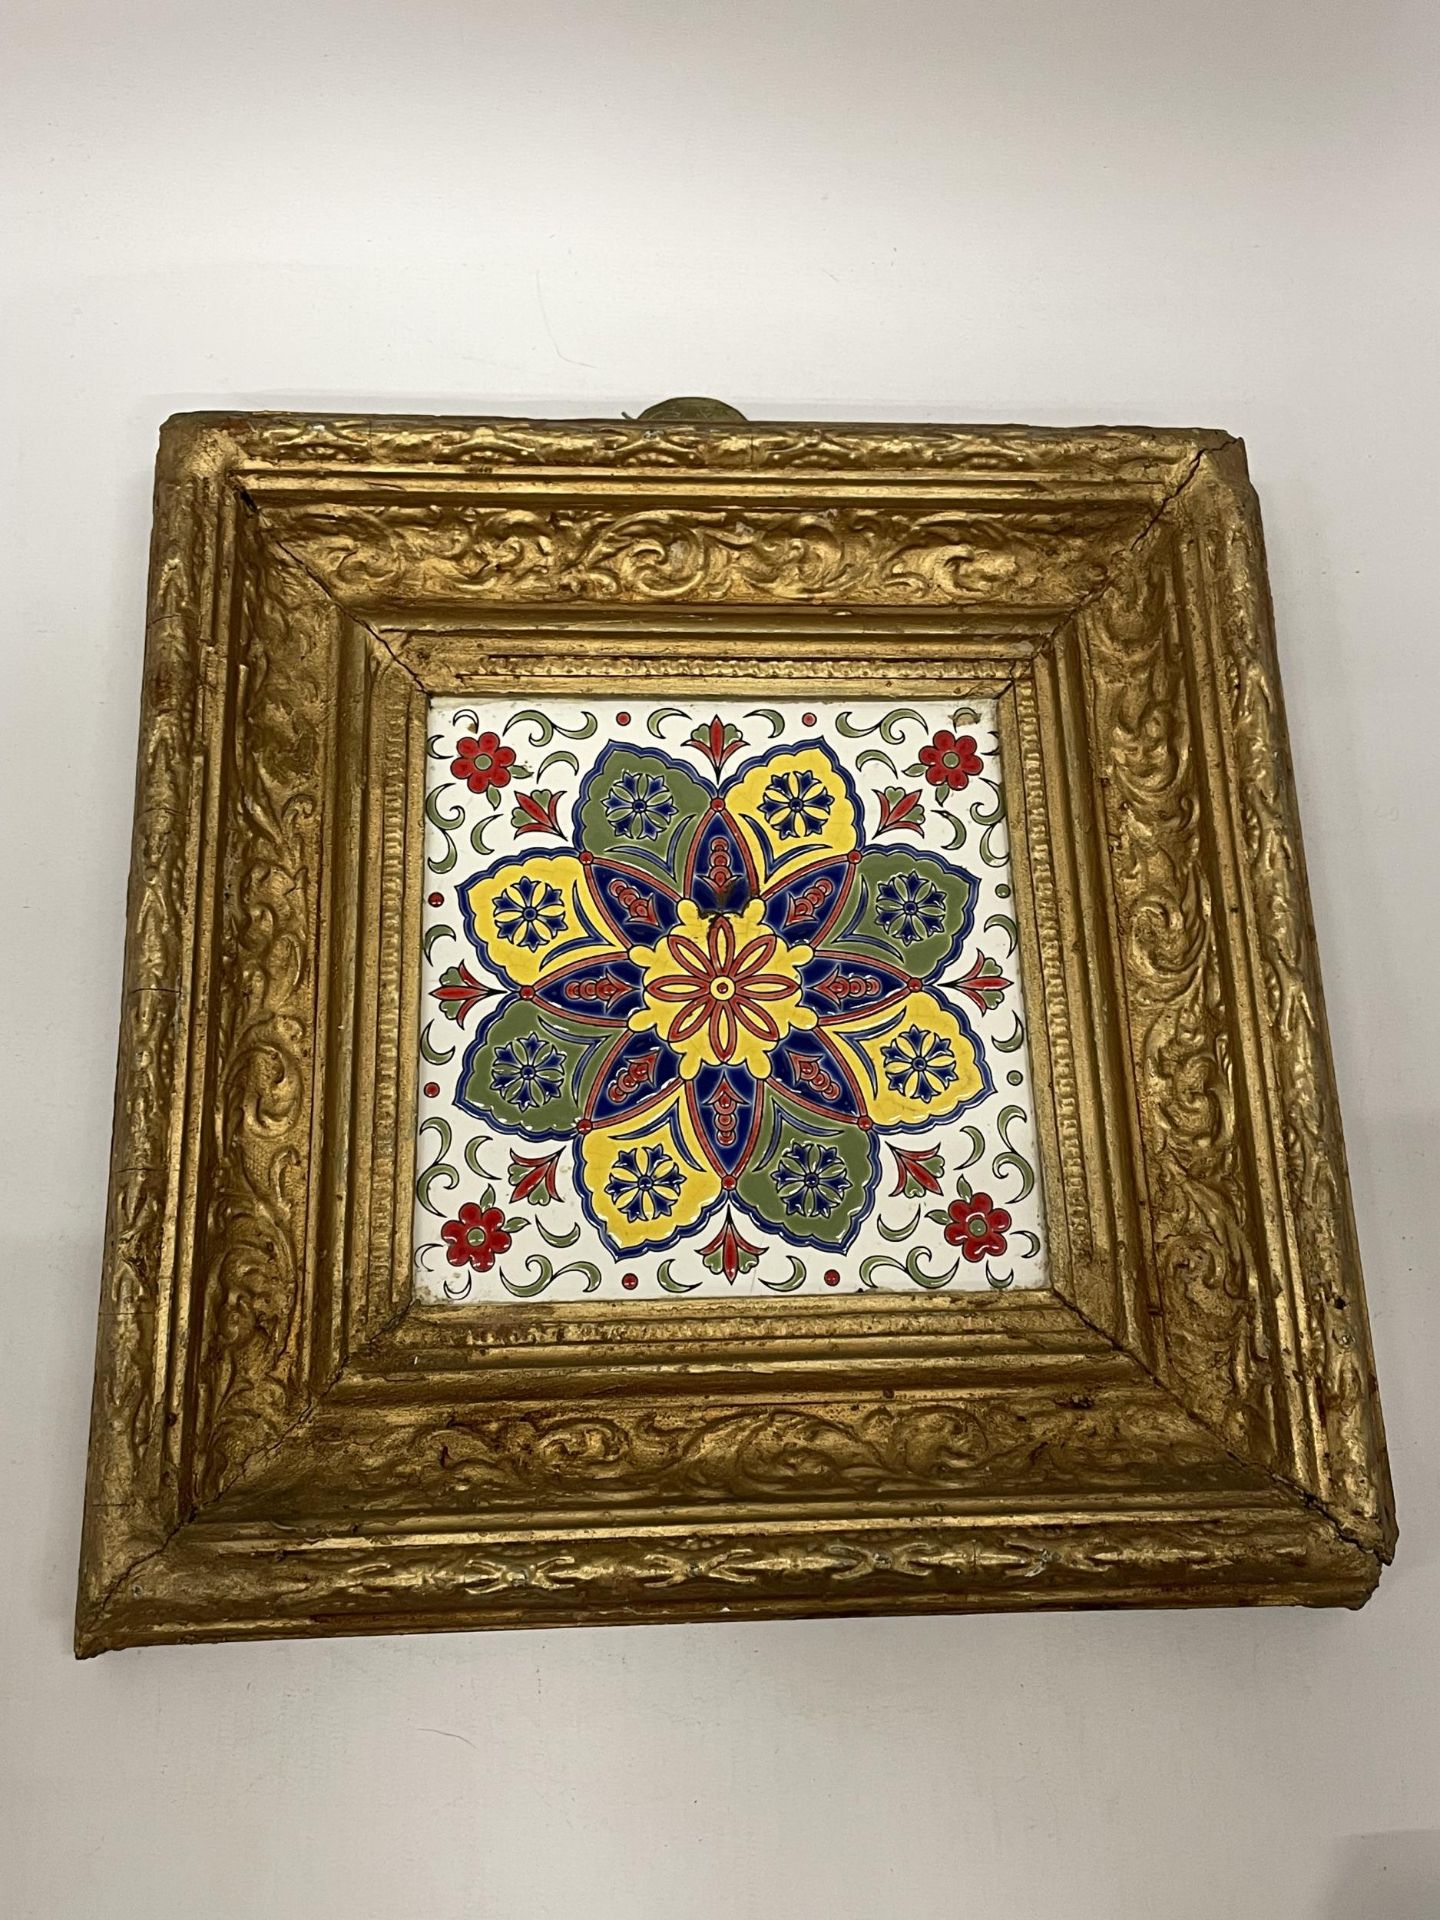 A DECORATIVE GILT FRAMED POSSIBLY LONGWY FRENCH POTTERY TILED PLAQUE